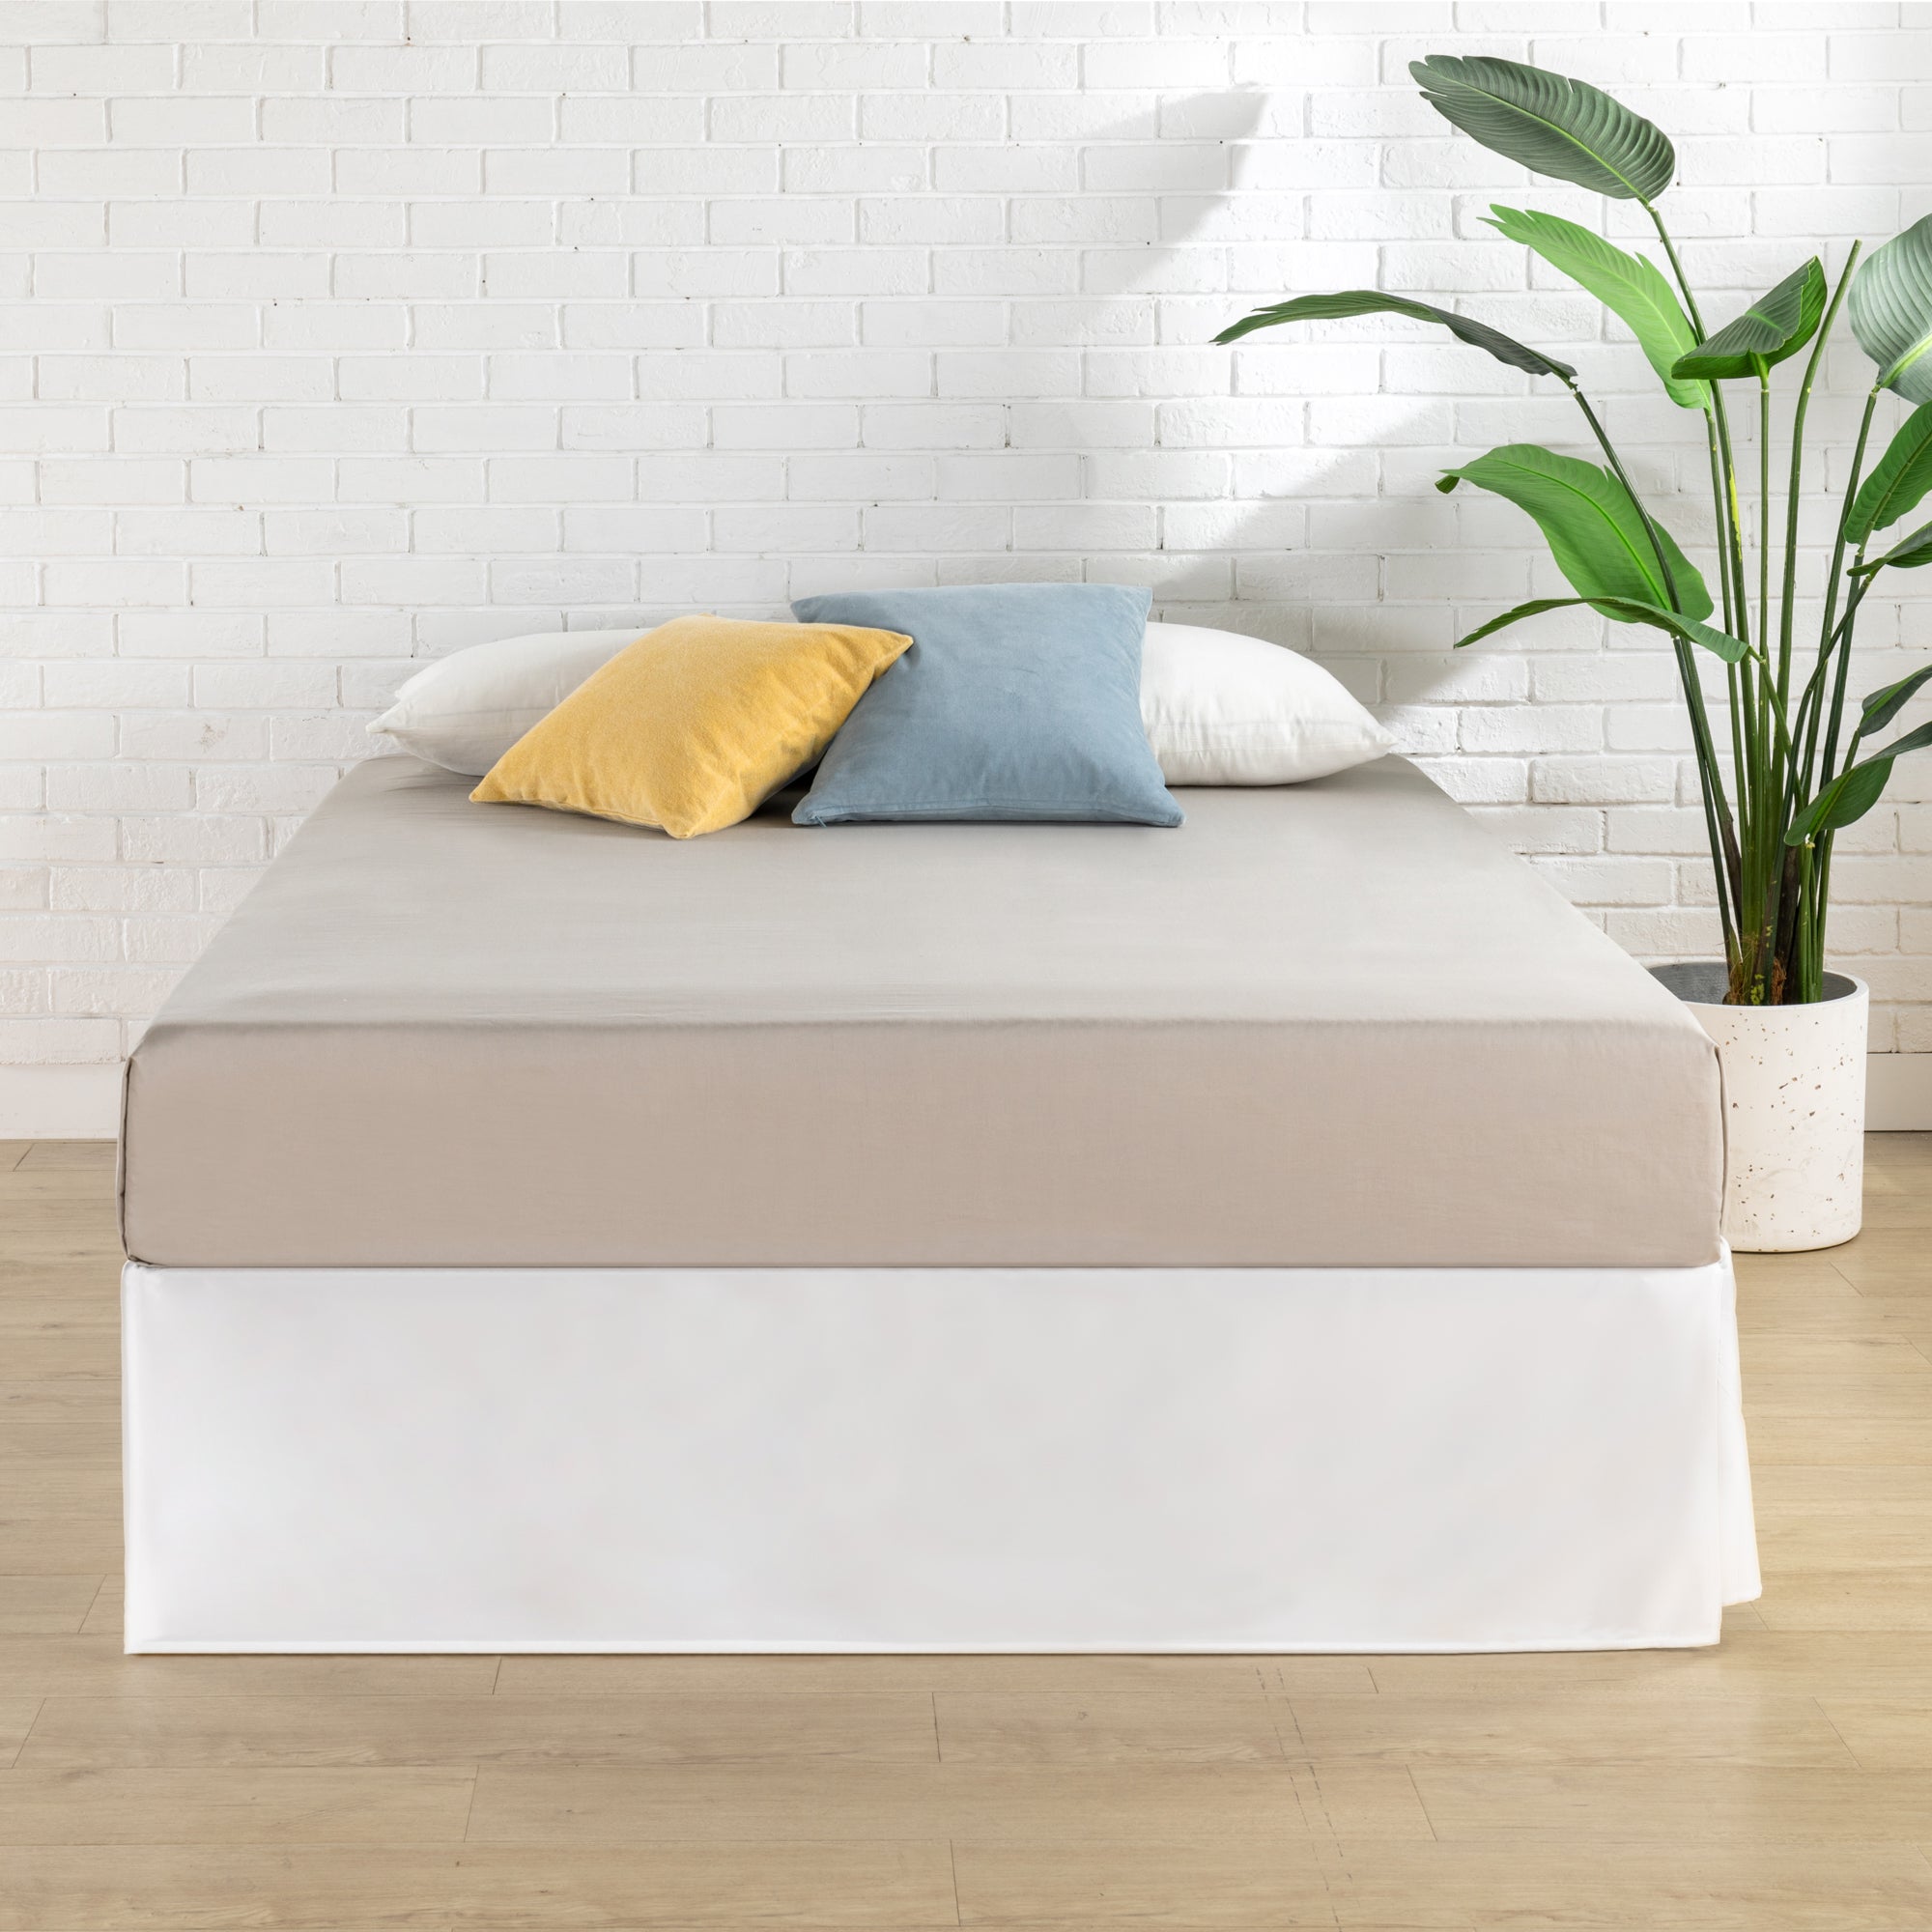 Pin by MATTRESS HELPER - SAGGING Bed on Sagging bed fix